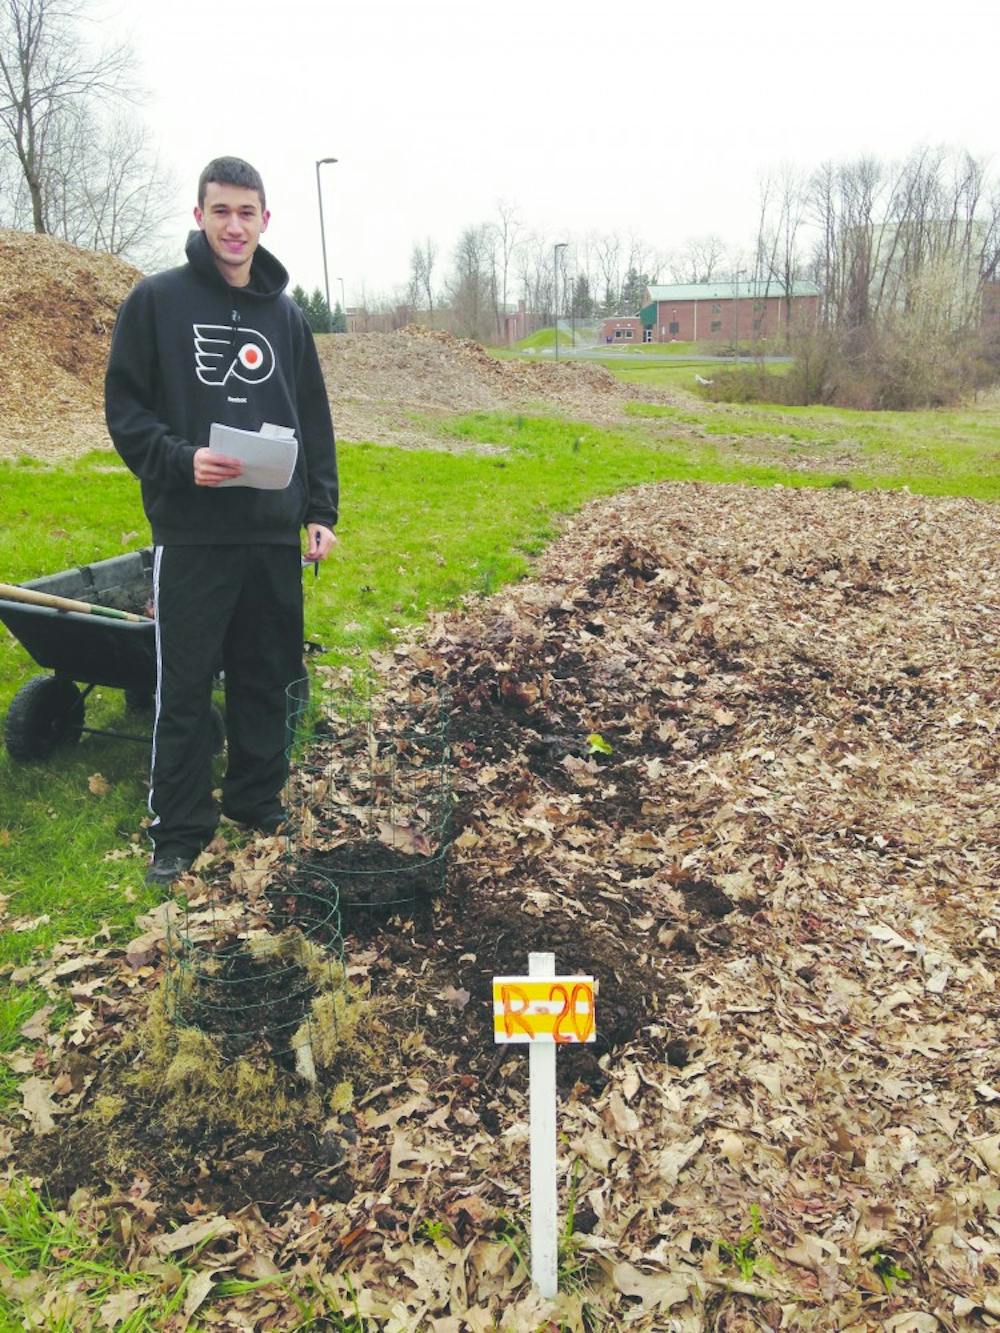 Student’s project aids in future for agriculture